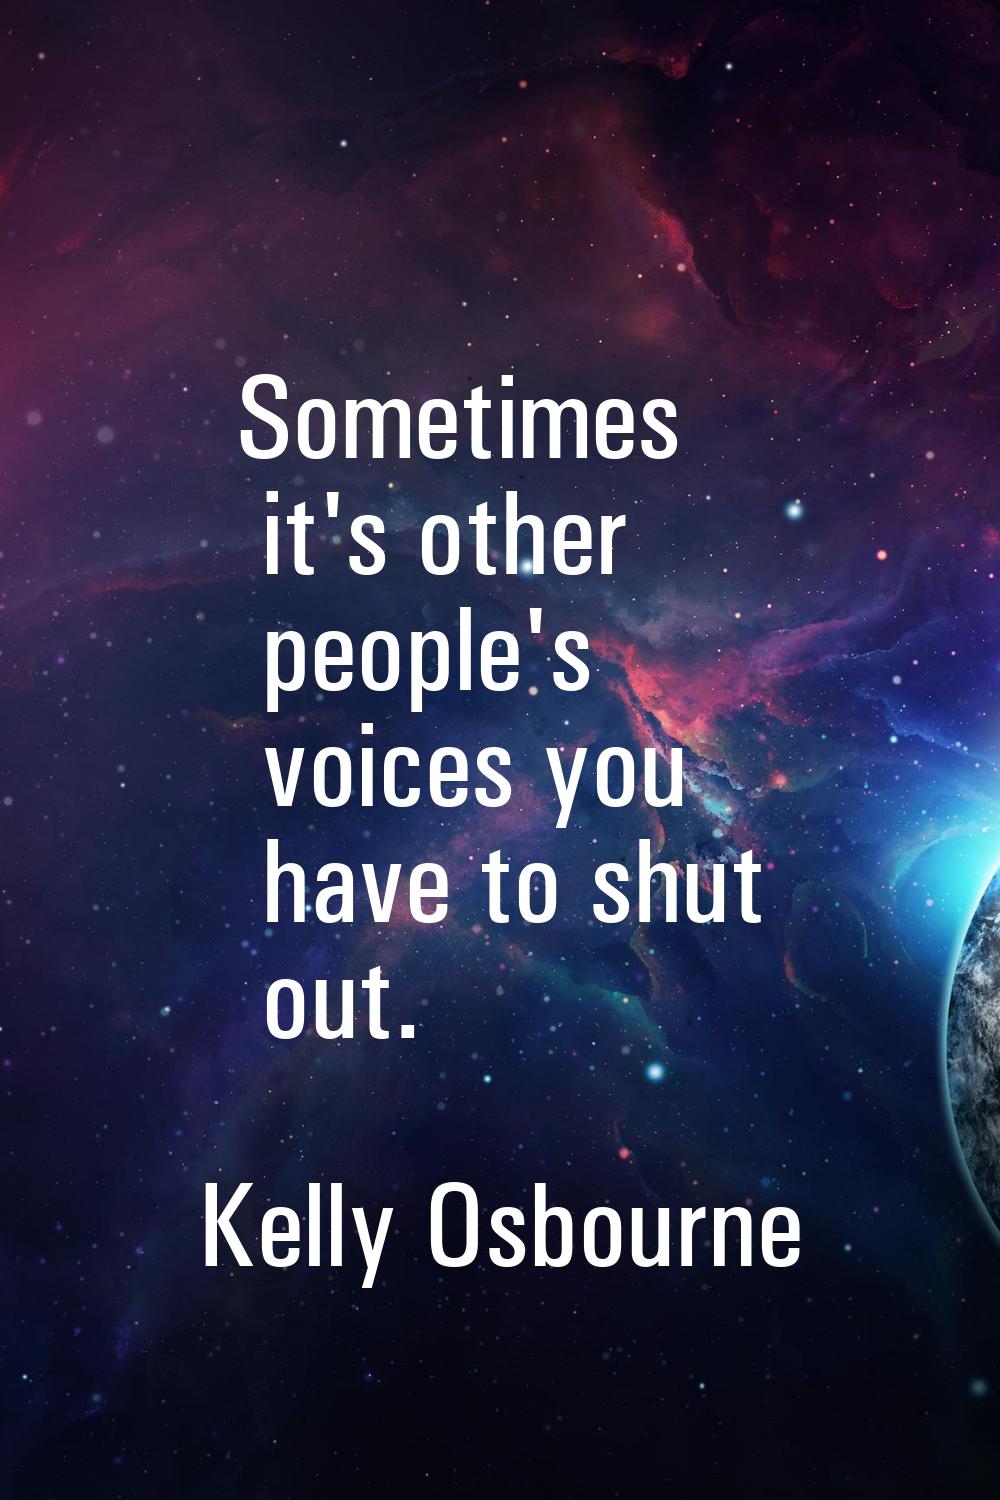 Sometimes it's other people's voices you have to shut out.